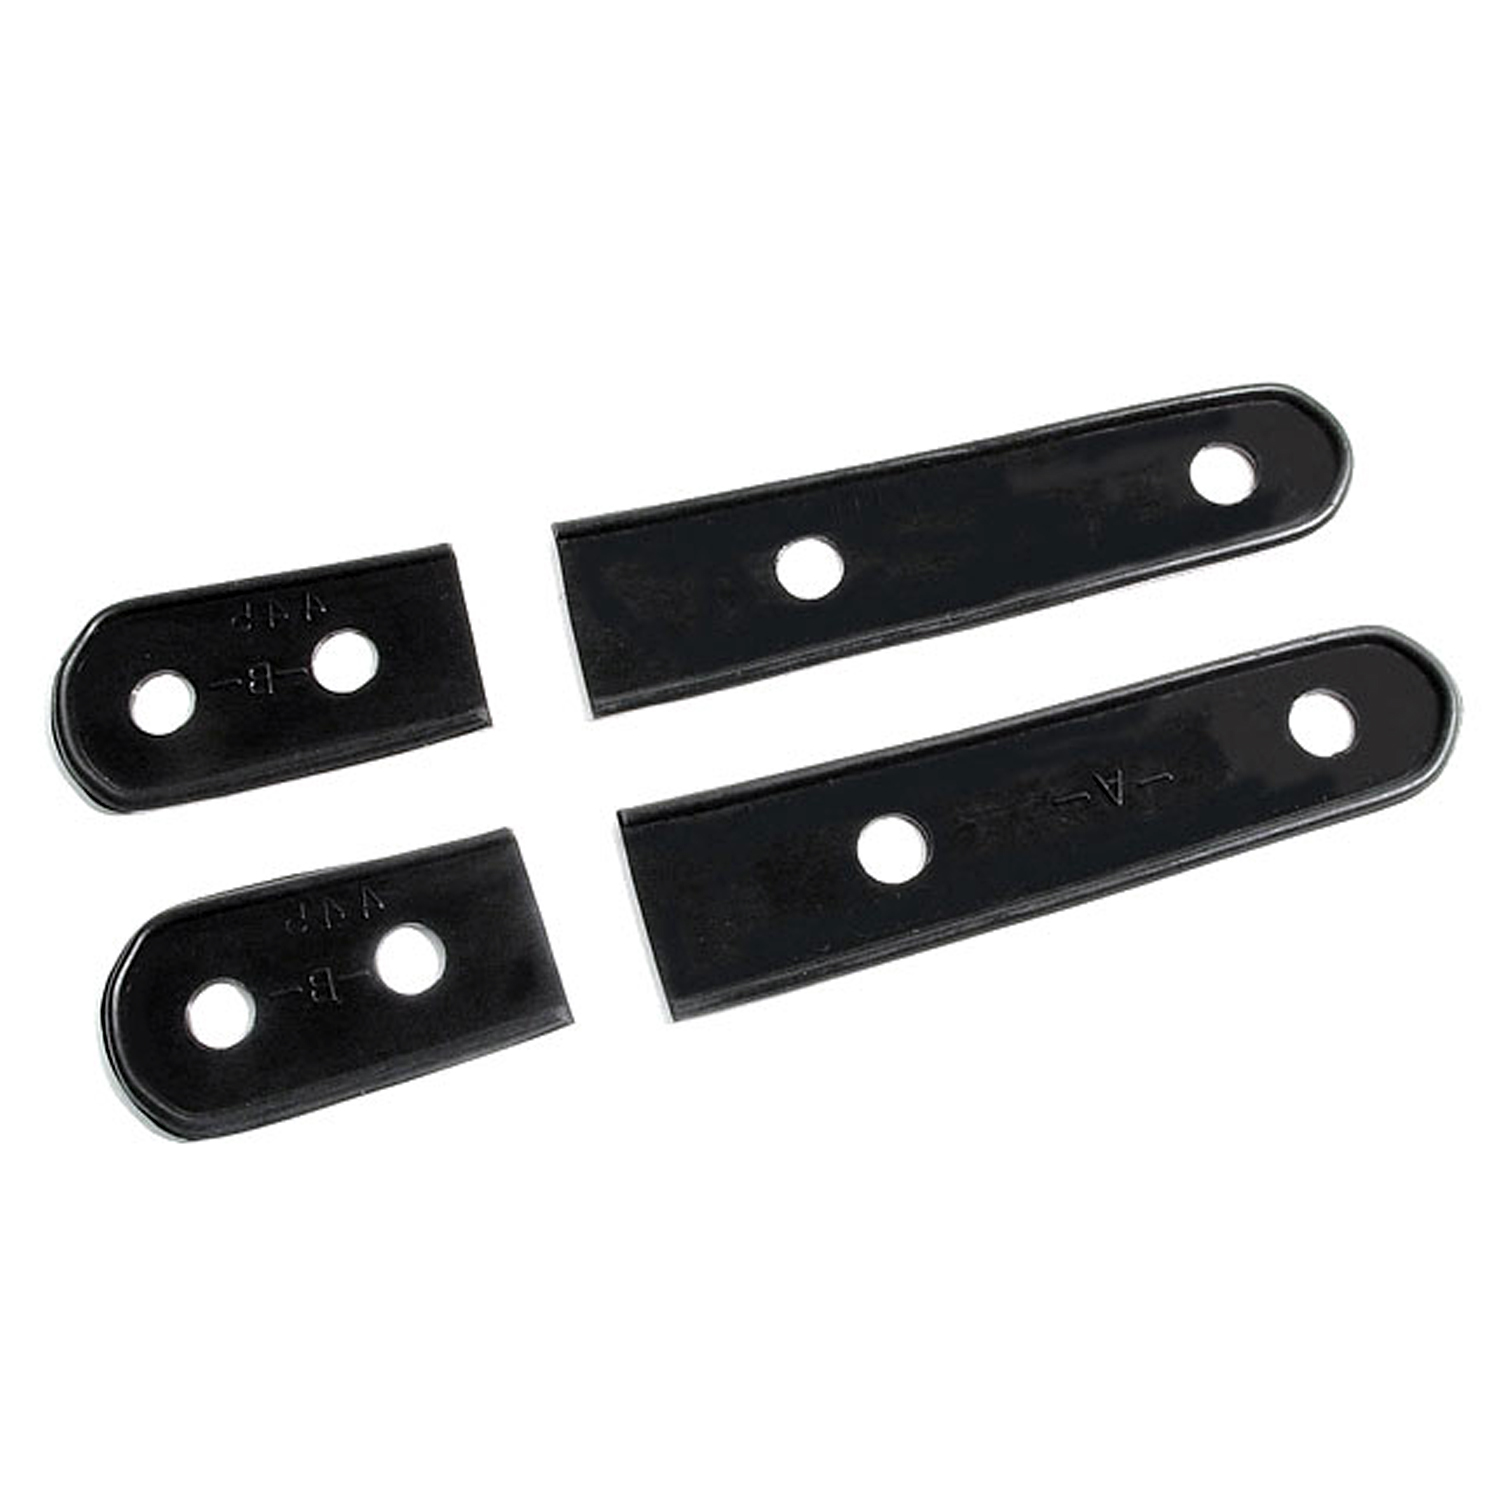 1940 Cadillac Series 62 Trunk Hinge Pads.  1-3/8 wide X 8 long.  4-Piece Set-MP 445